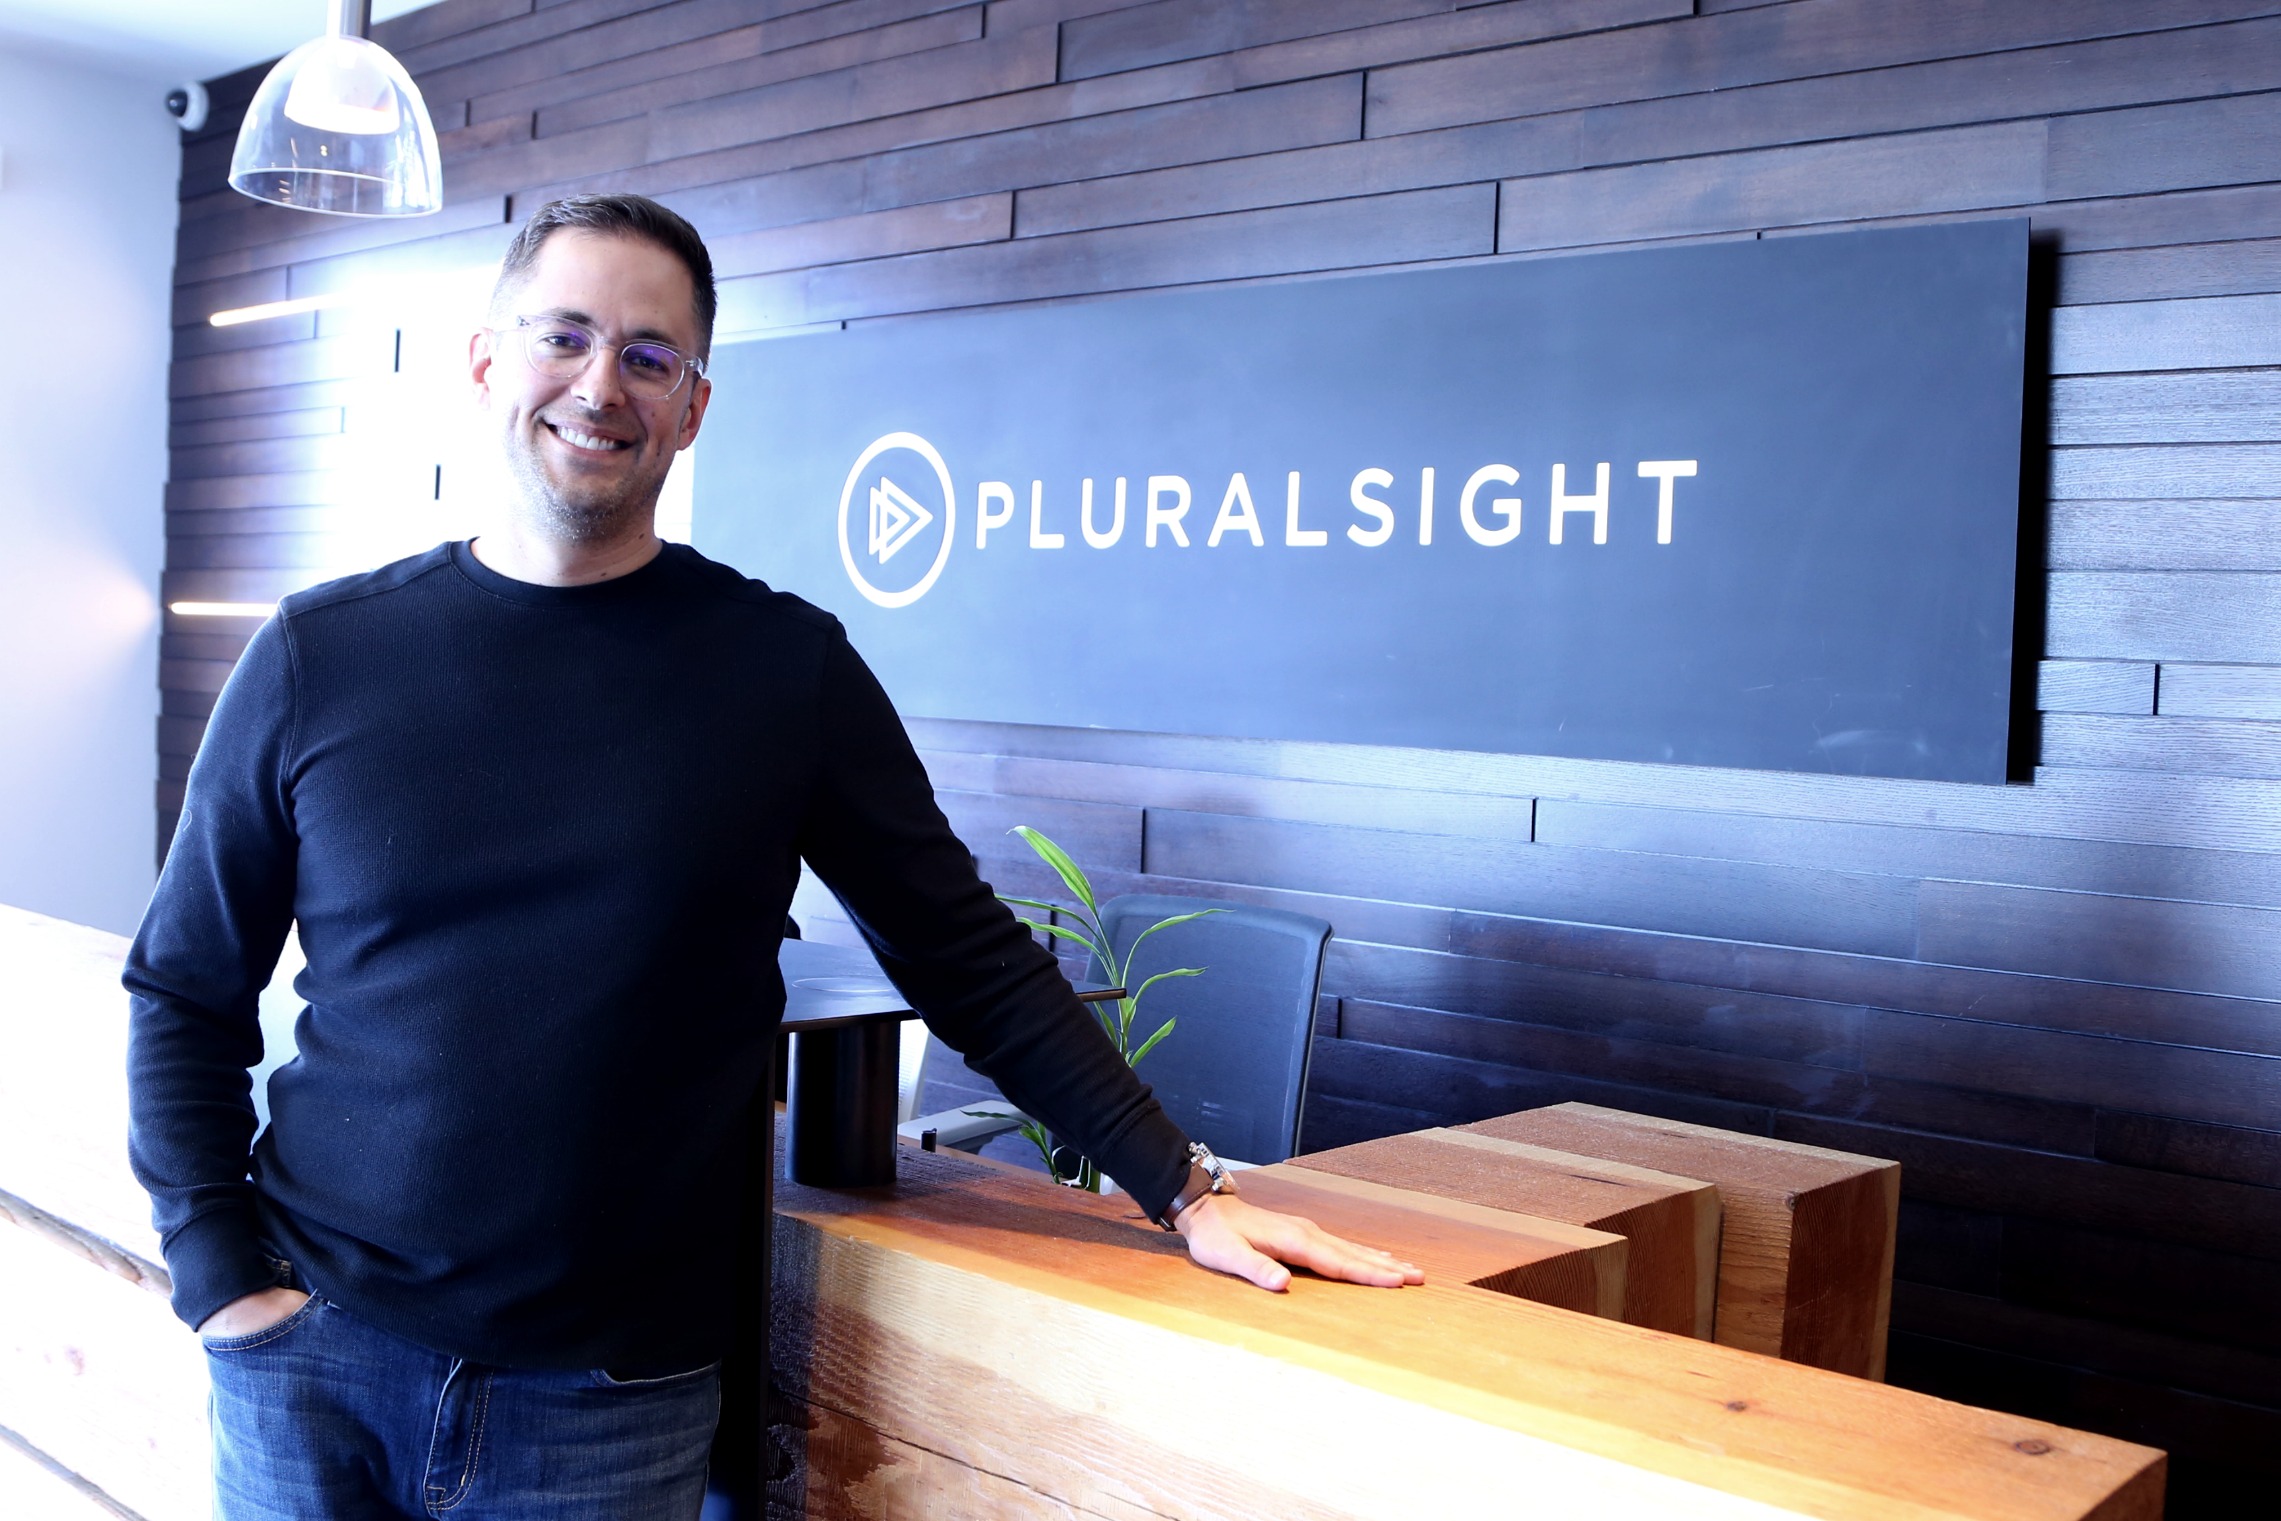 Ipo pluralsight enforex barcelona email sign